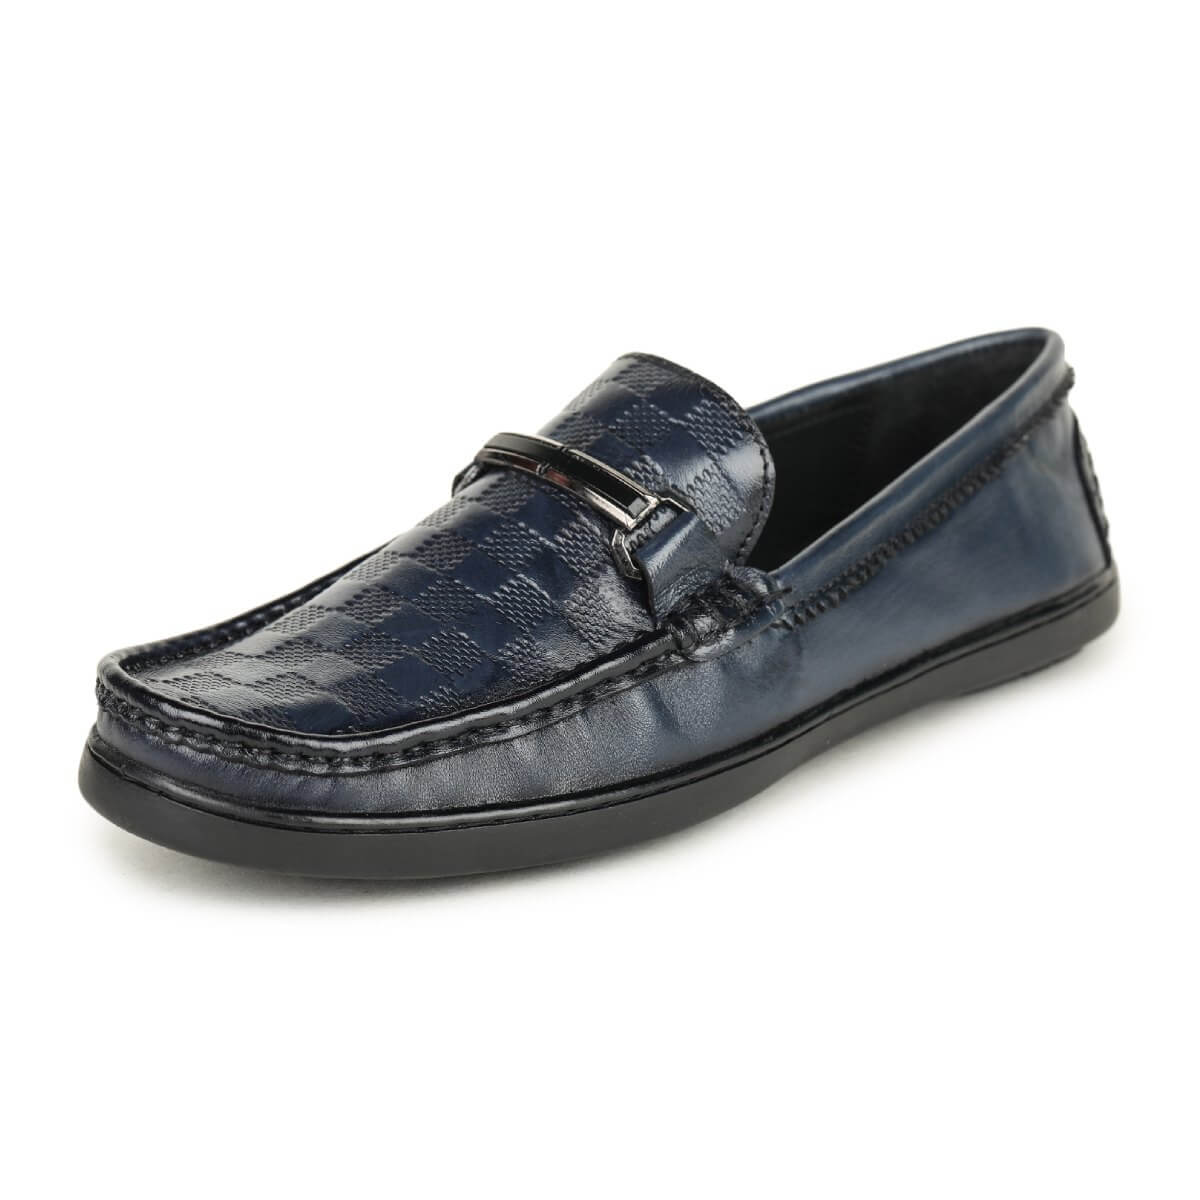 checkbox pattern loafers blue_8